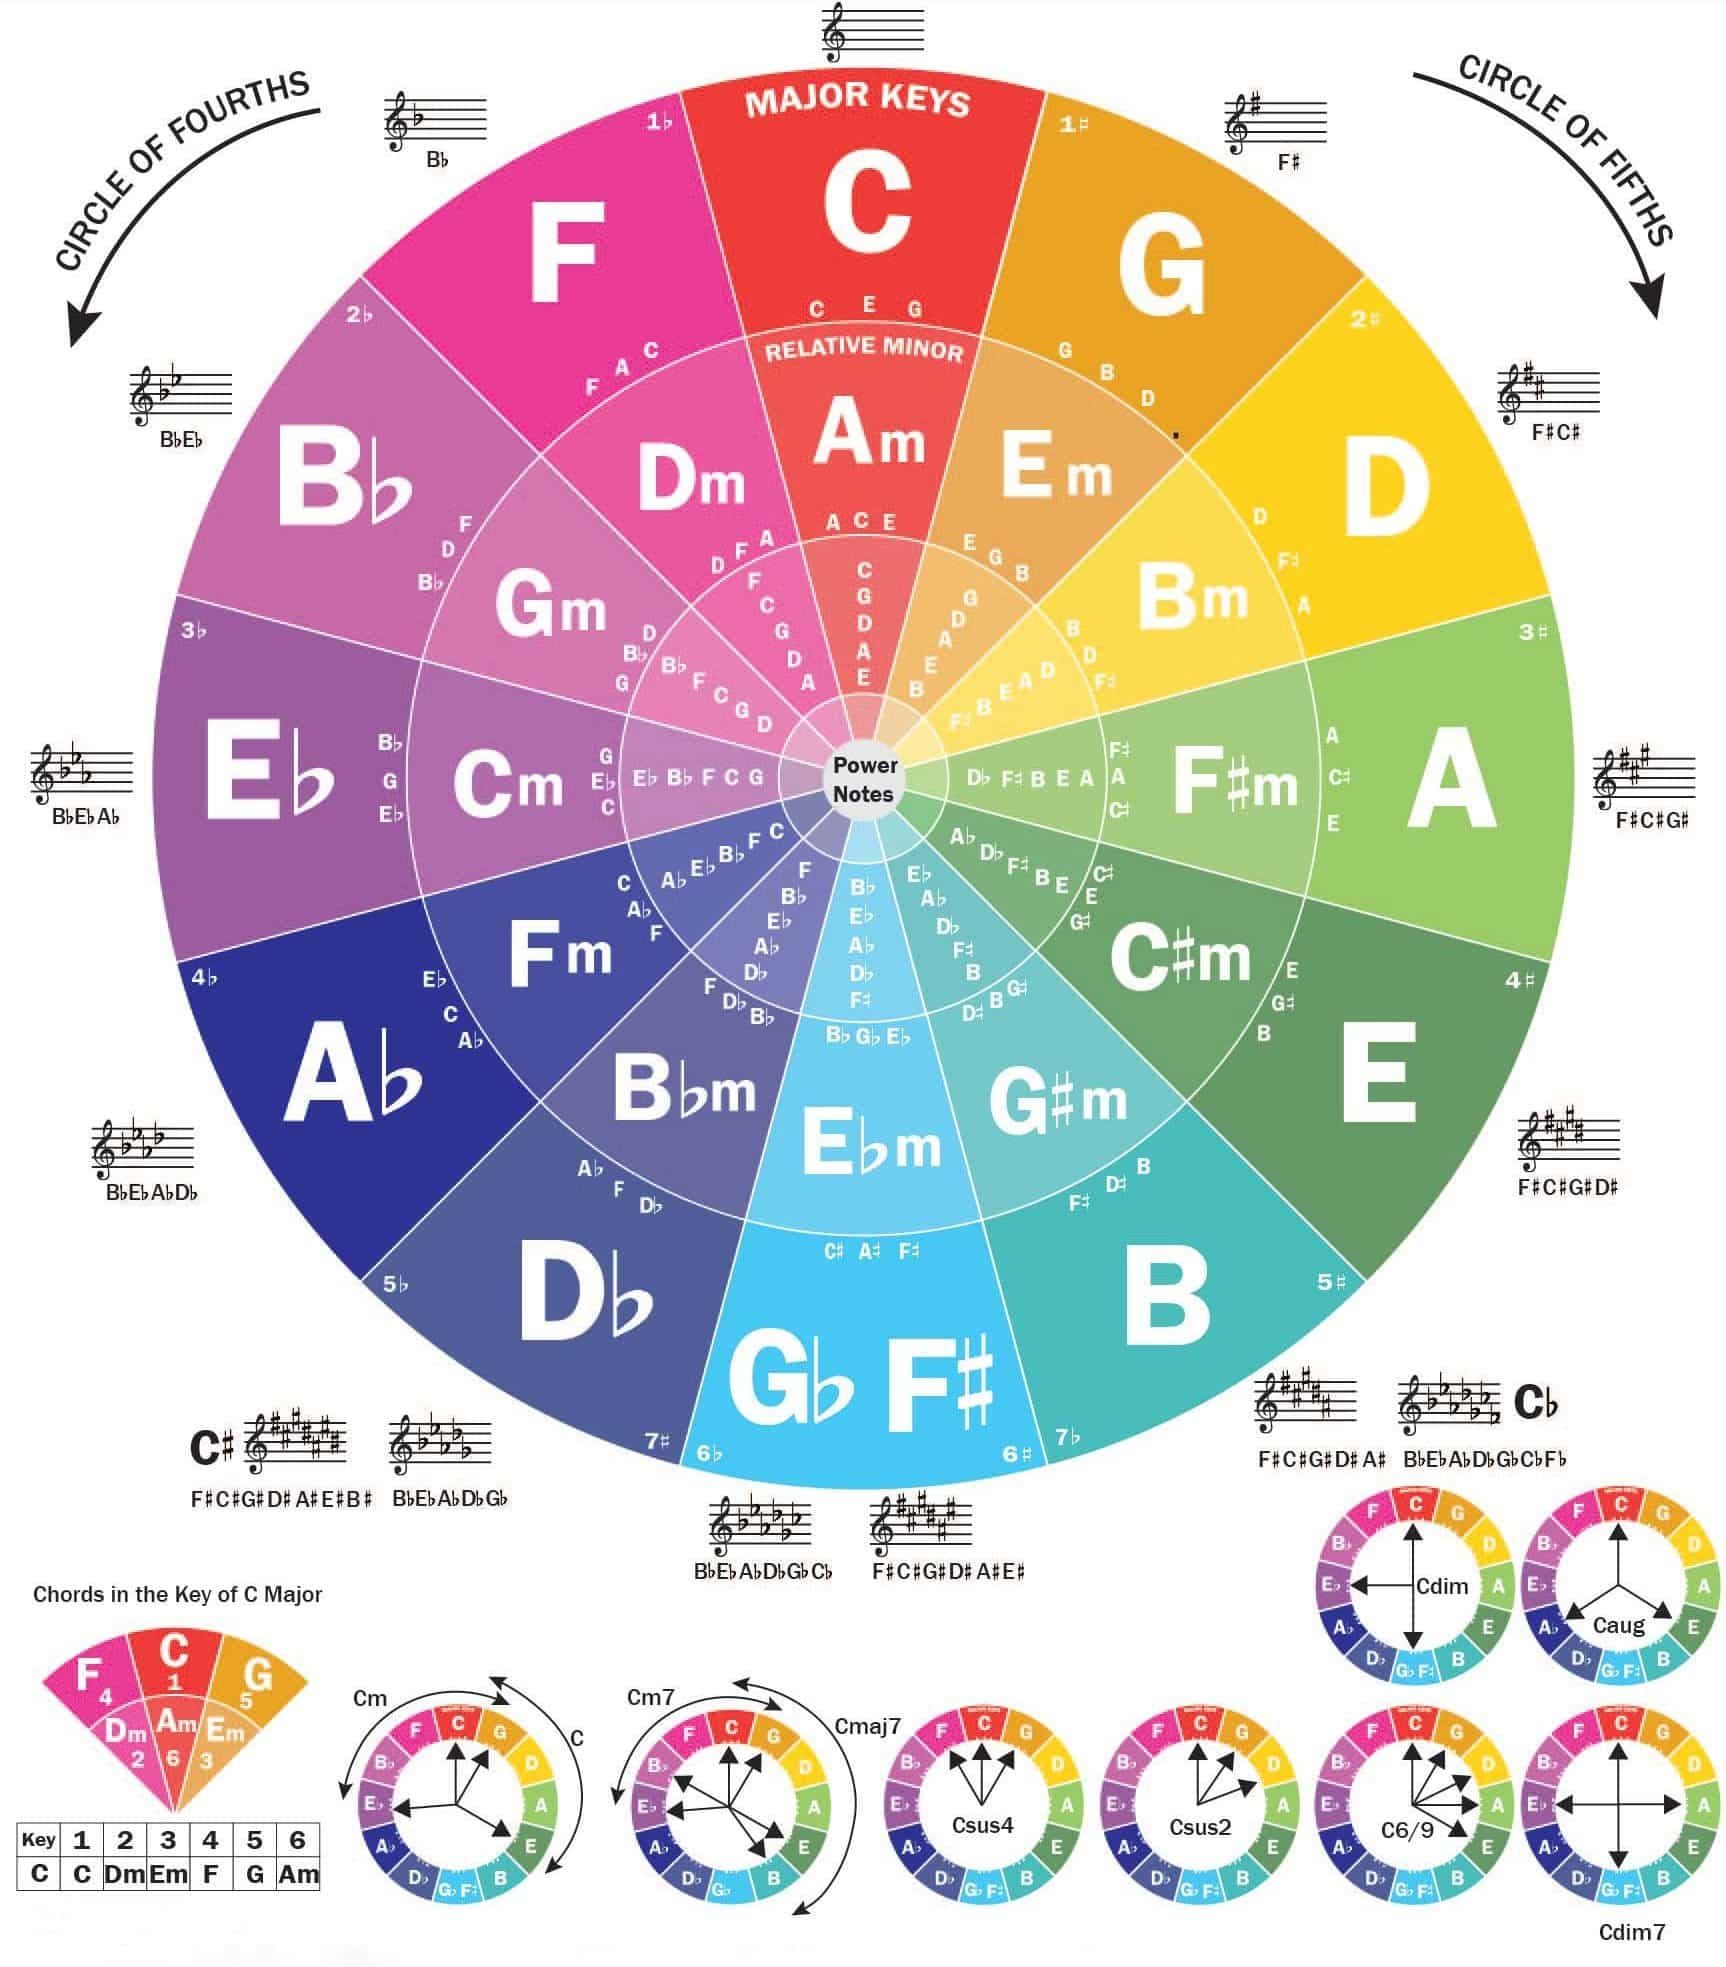 The circle of fifths.